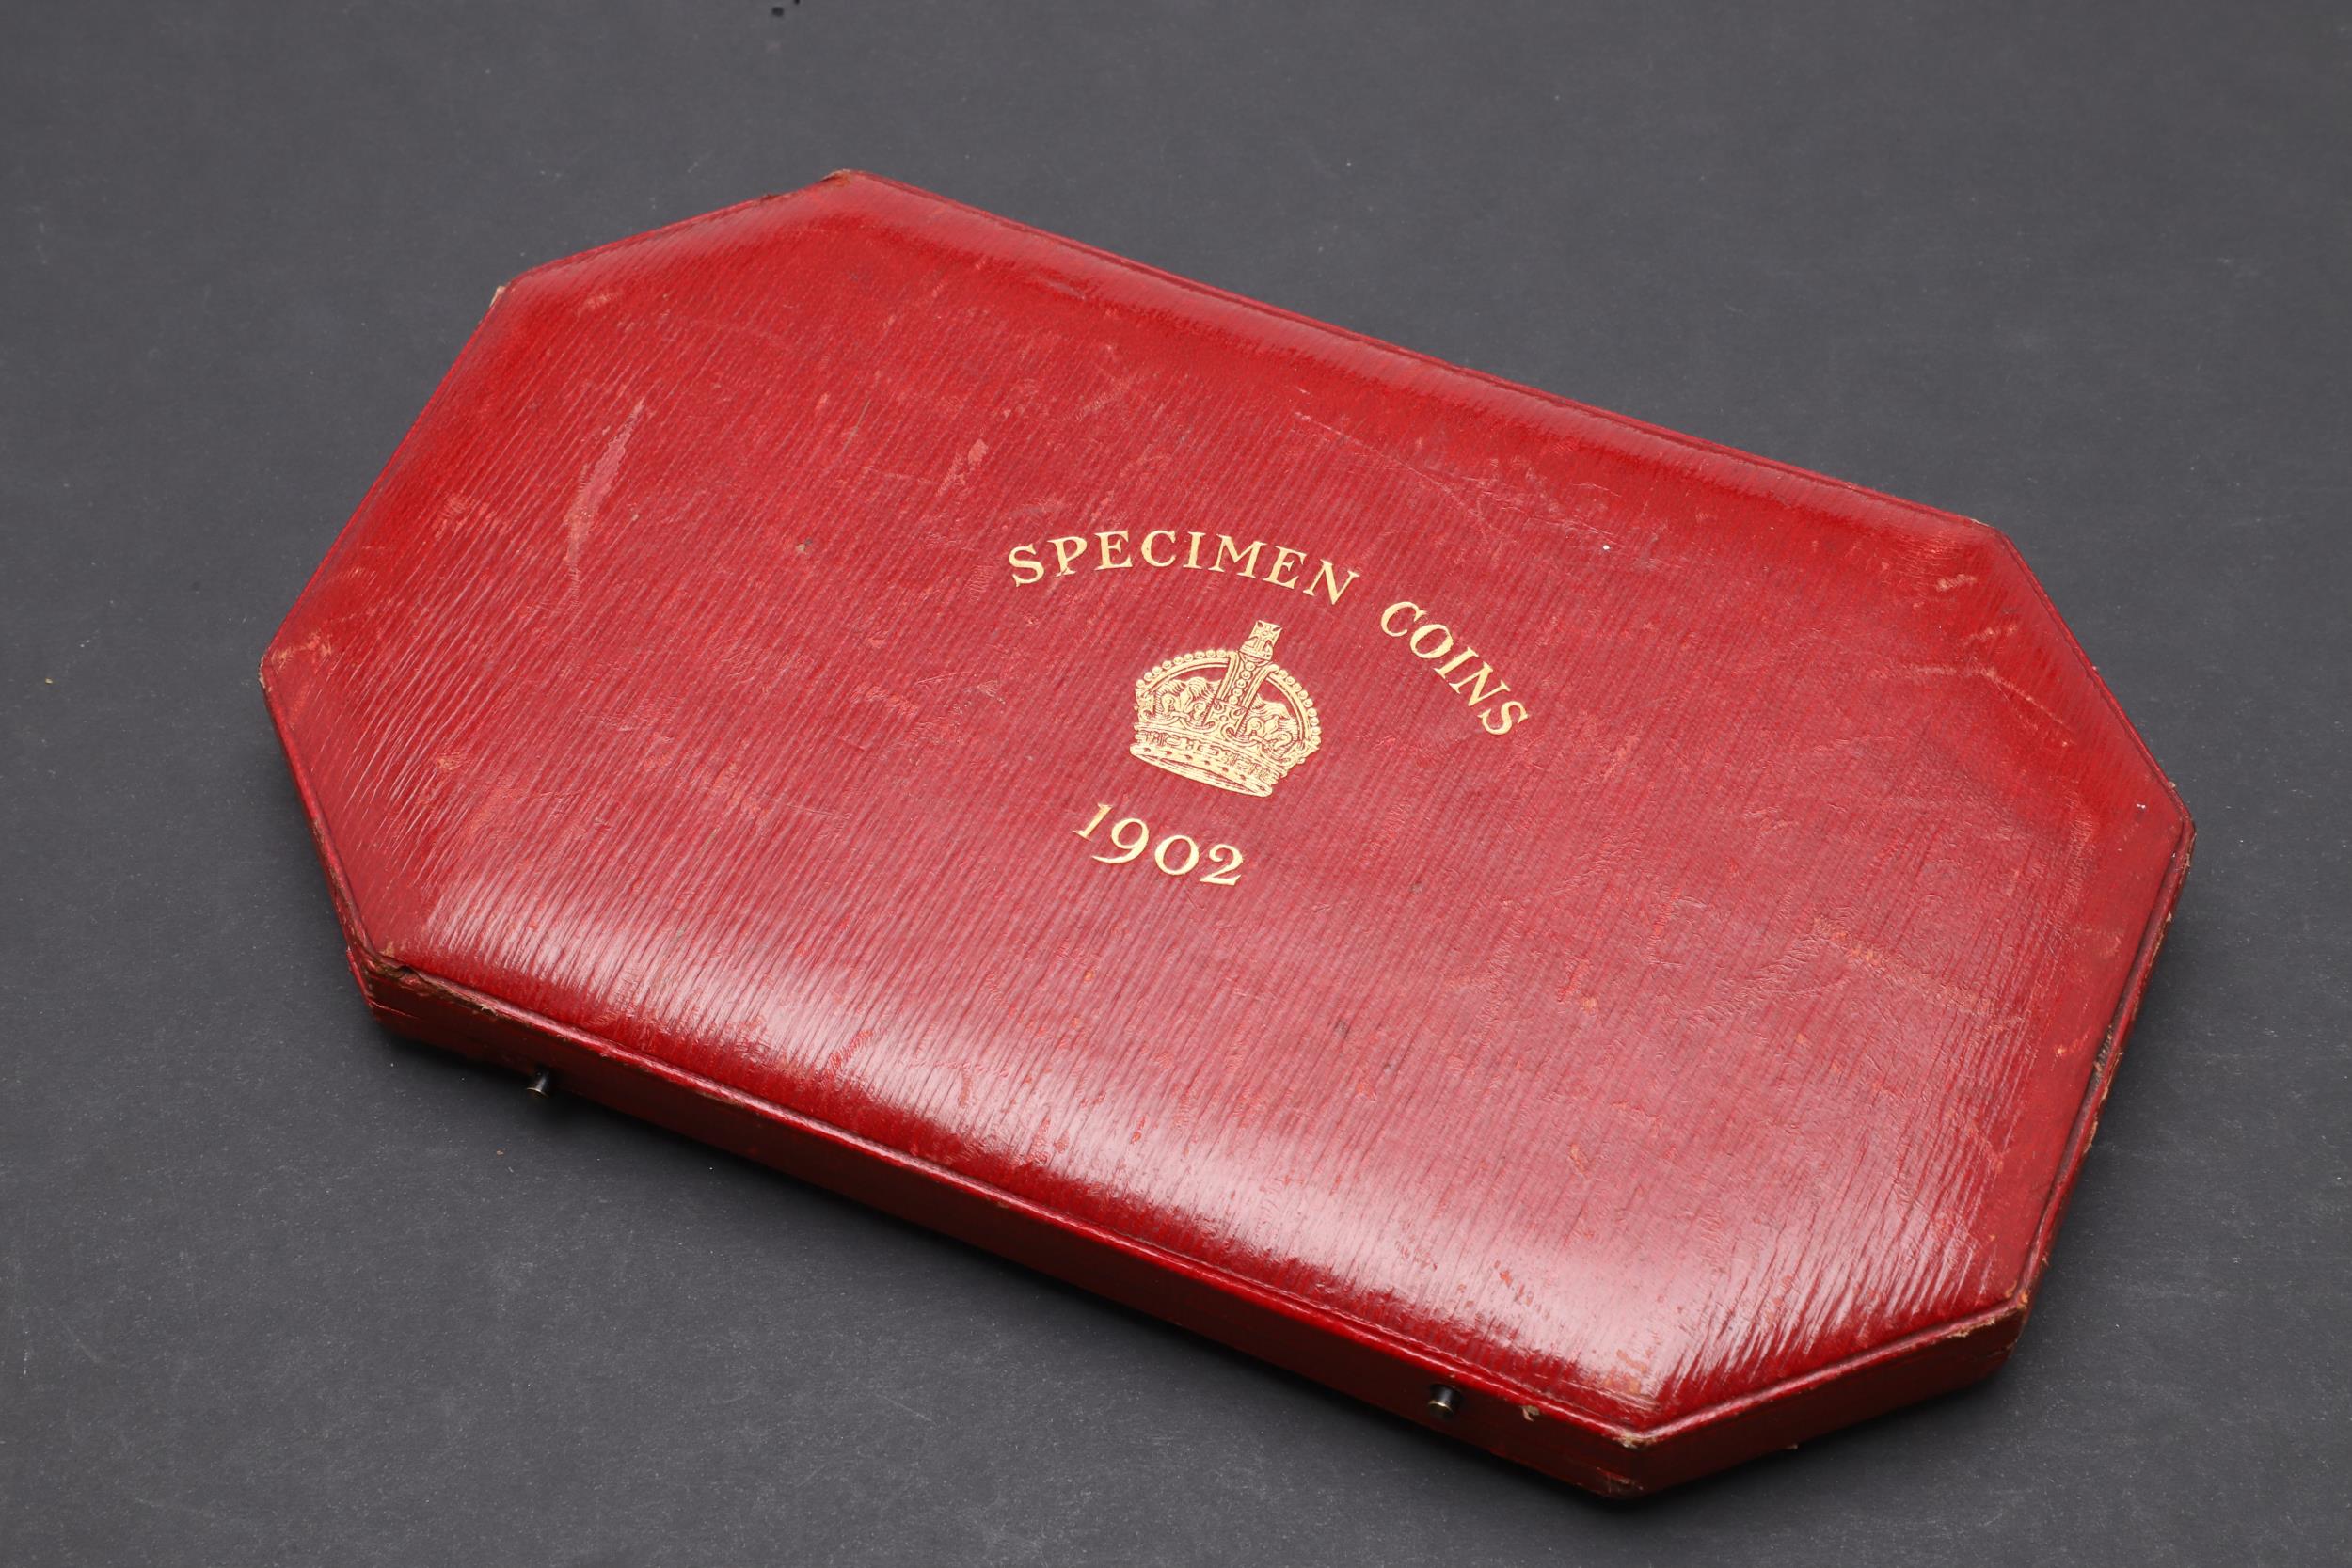 A CASED SET OF EDWARD VII MATT PROOF MAUNDY COINS, 1902. - Image 5 of 5